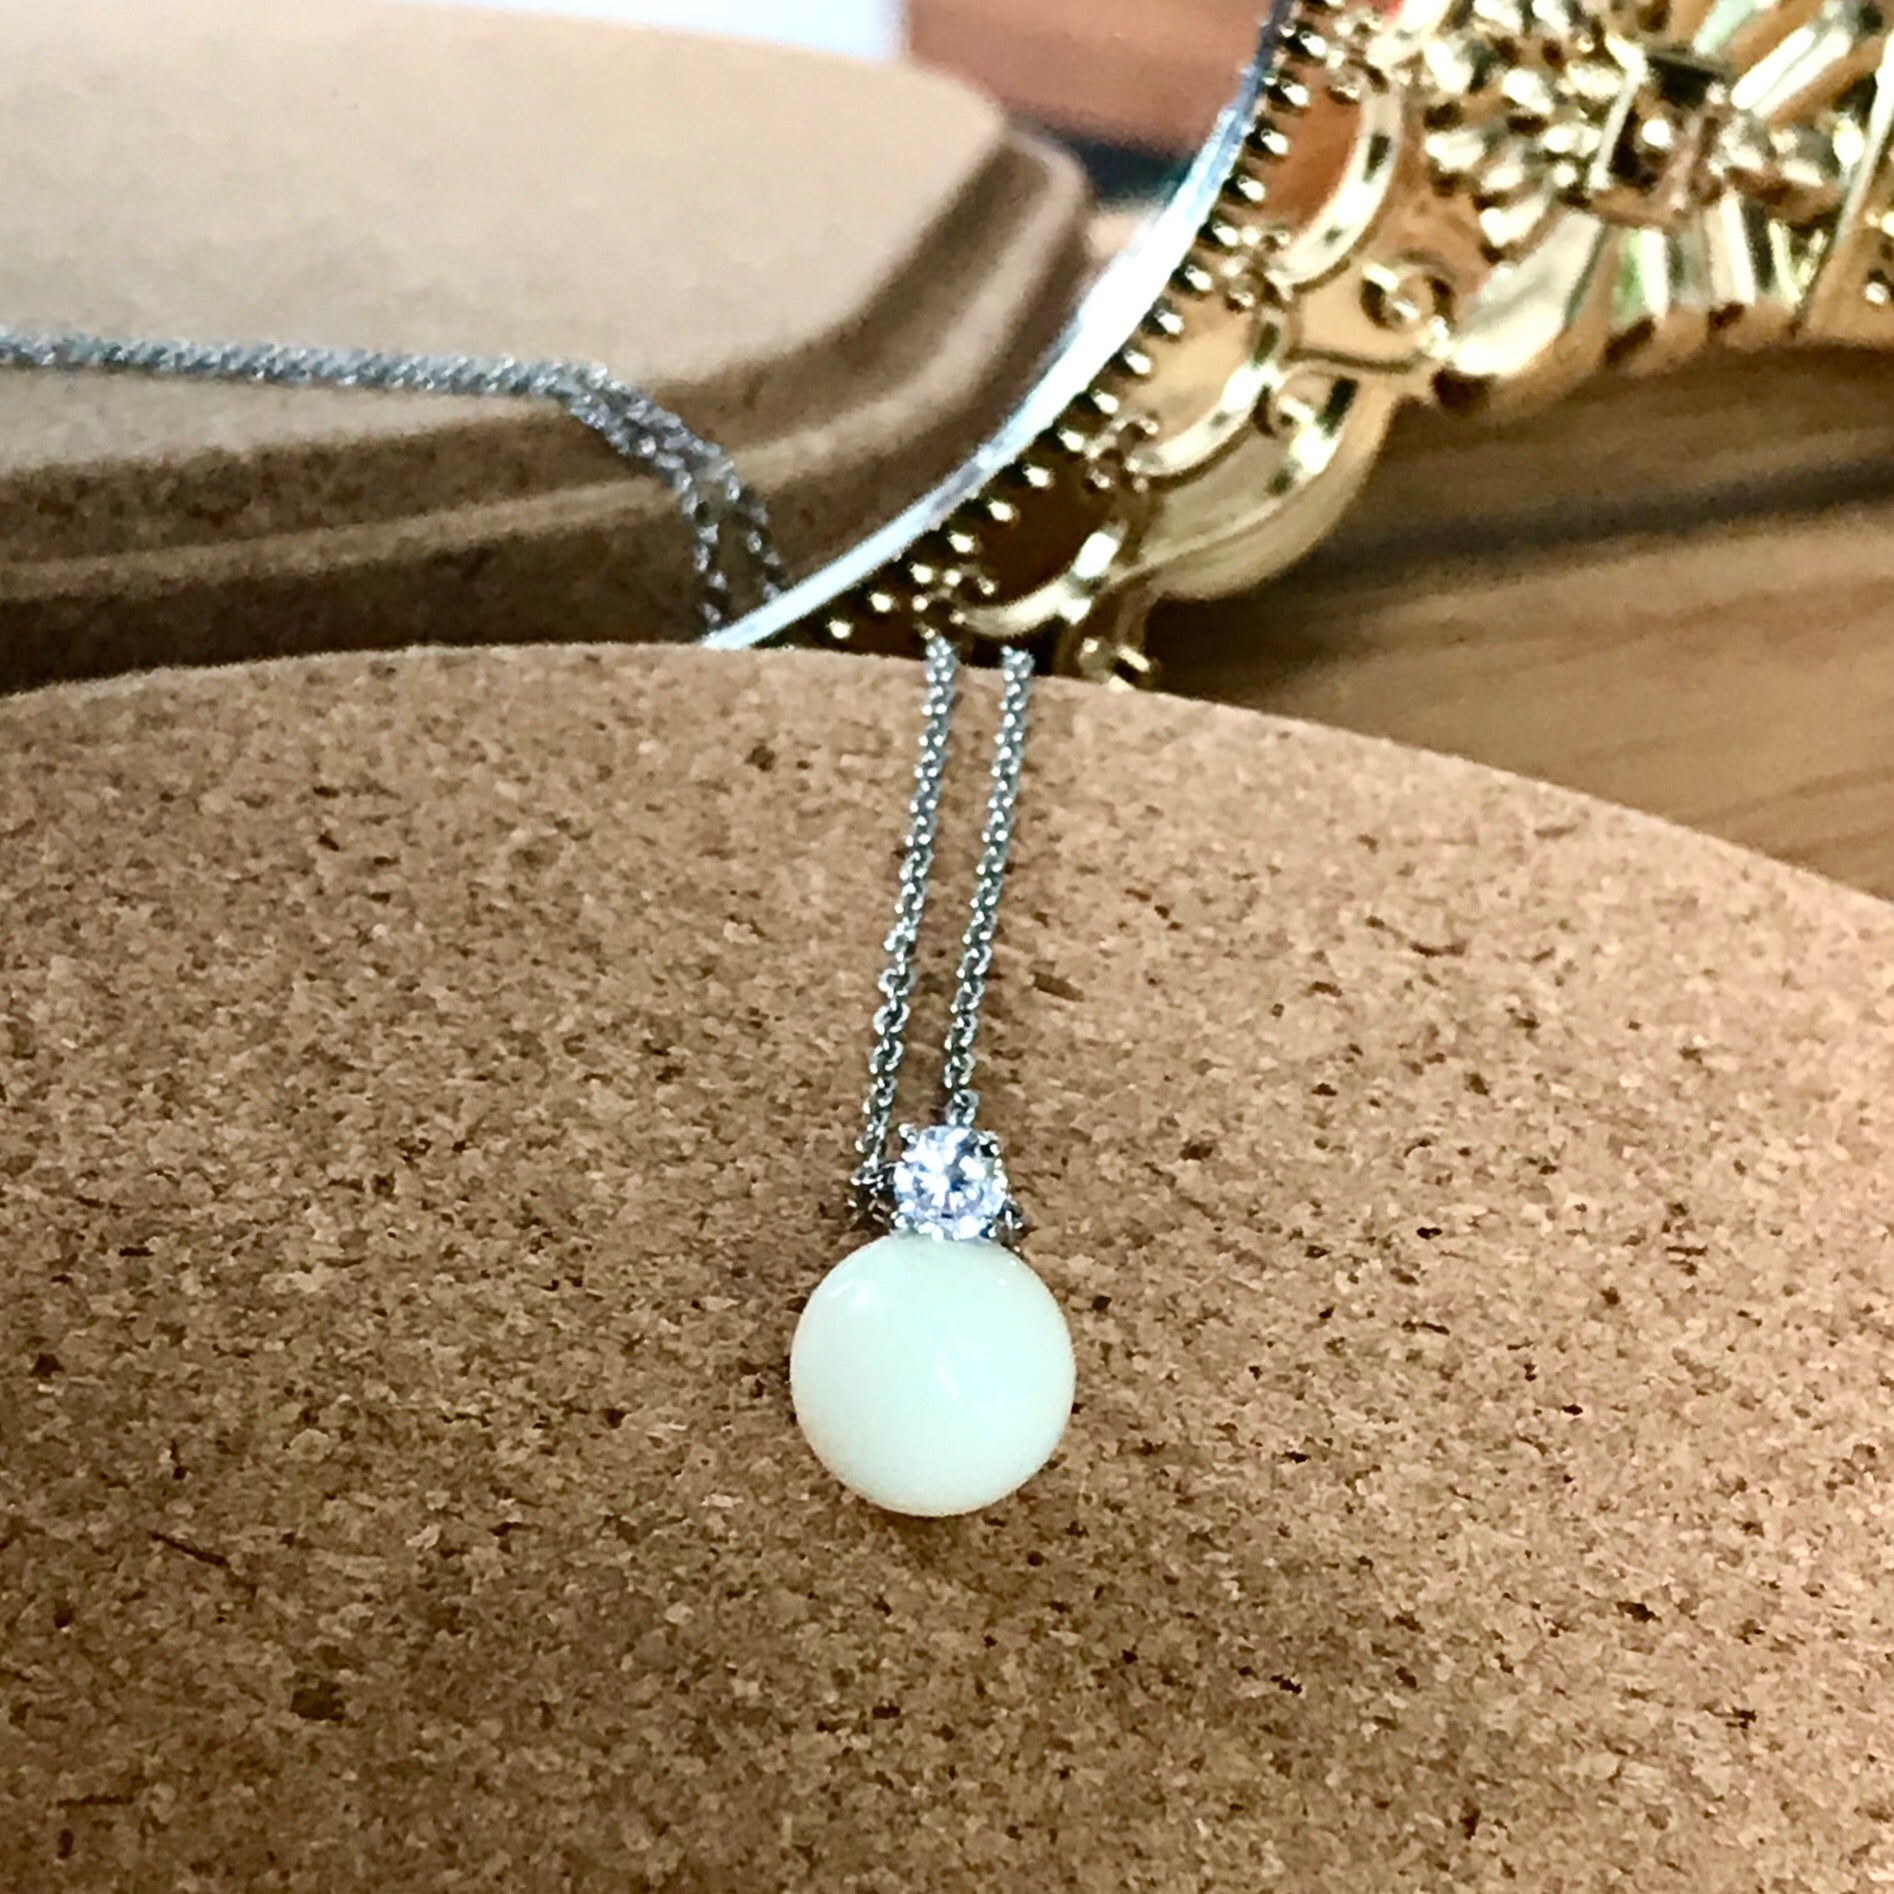 DIANA BREASTMILK PEARL WITH CUBIC ZIRCONIA PENDANT NECKLACE